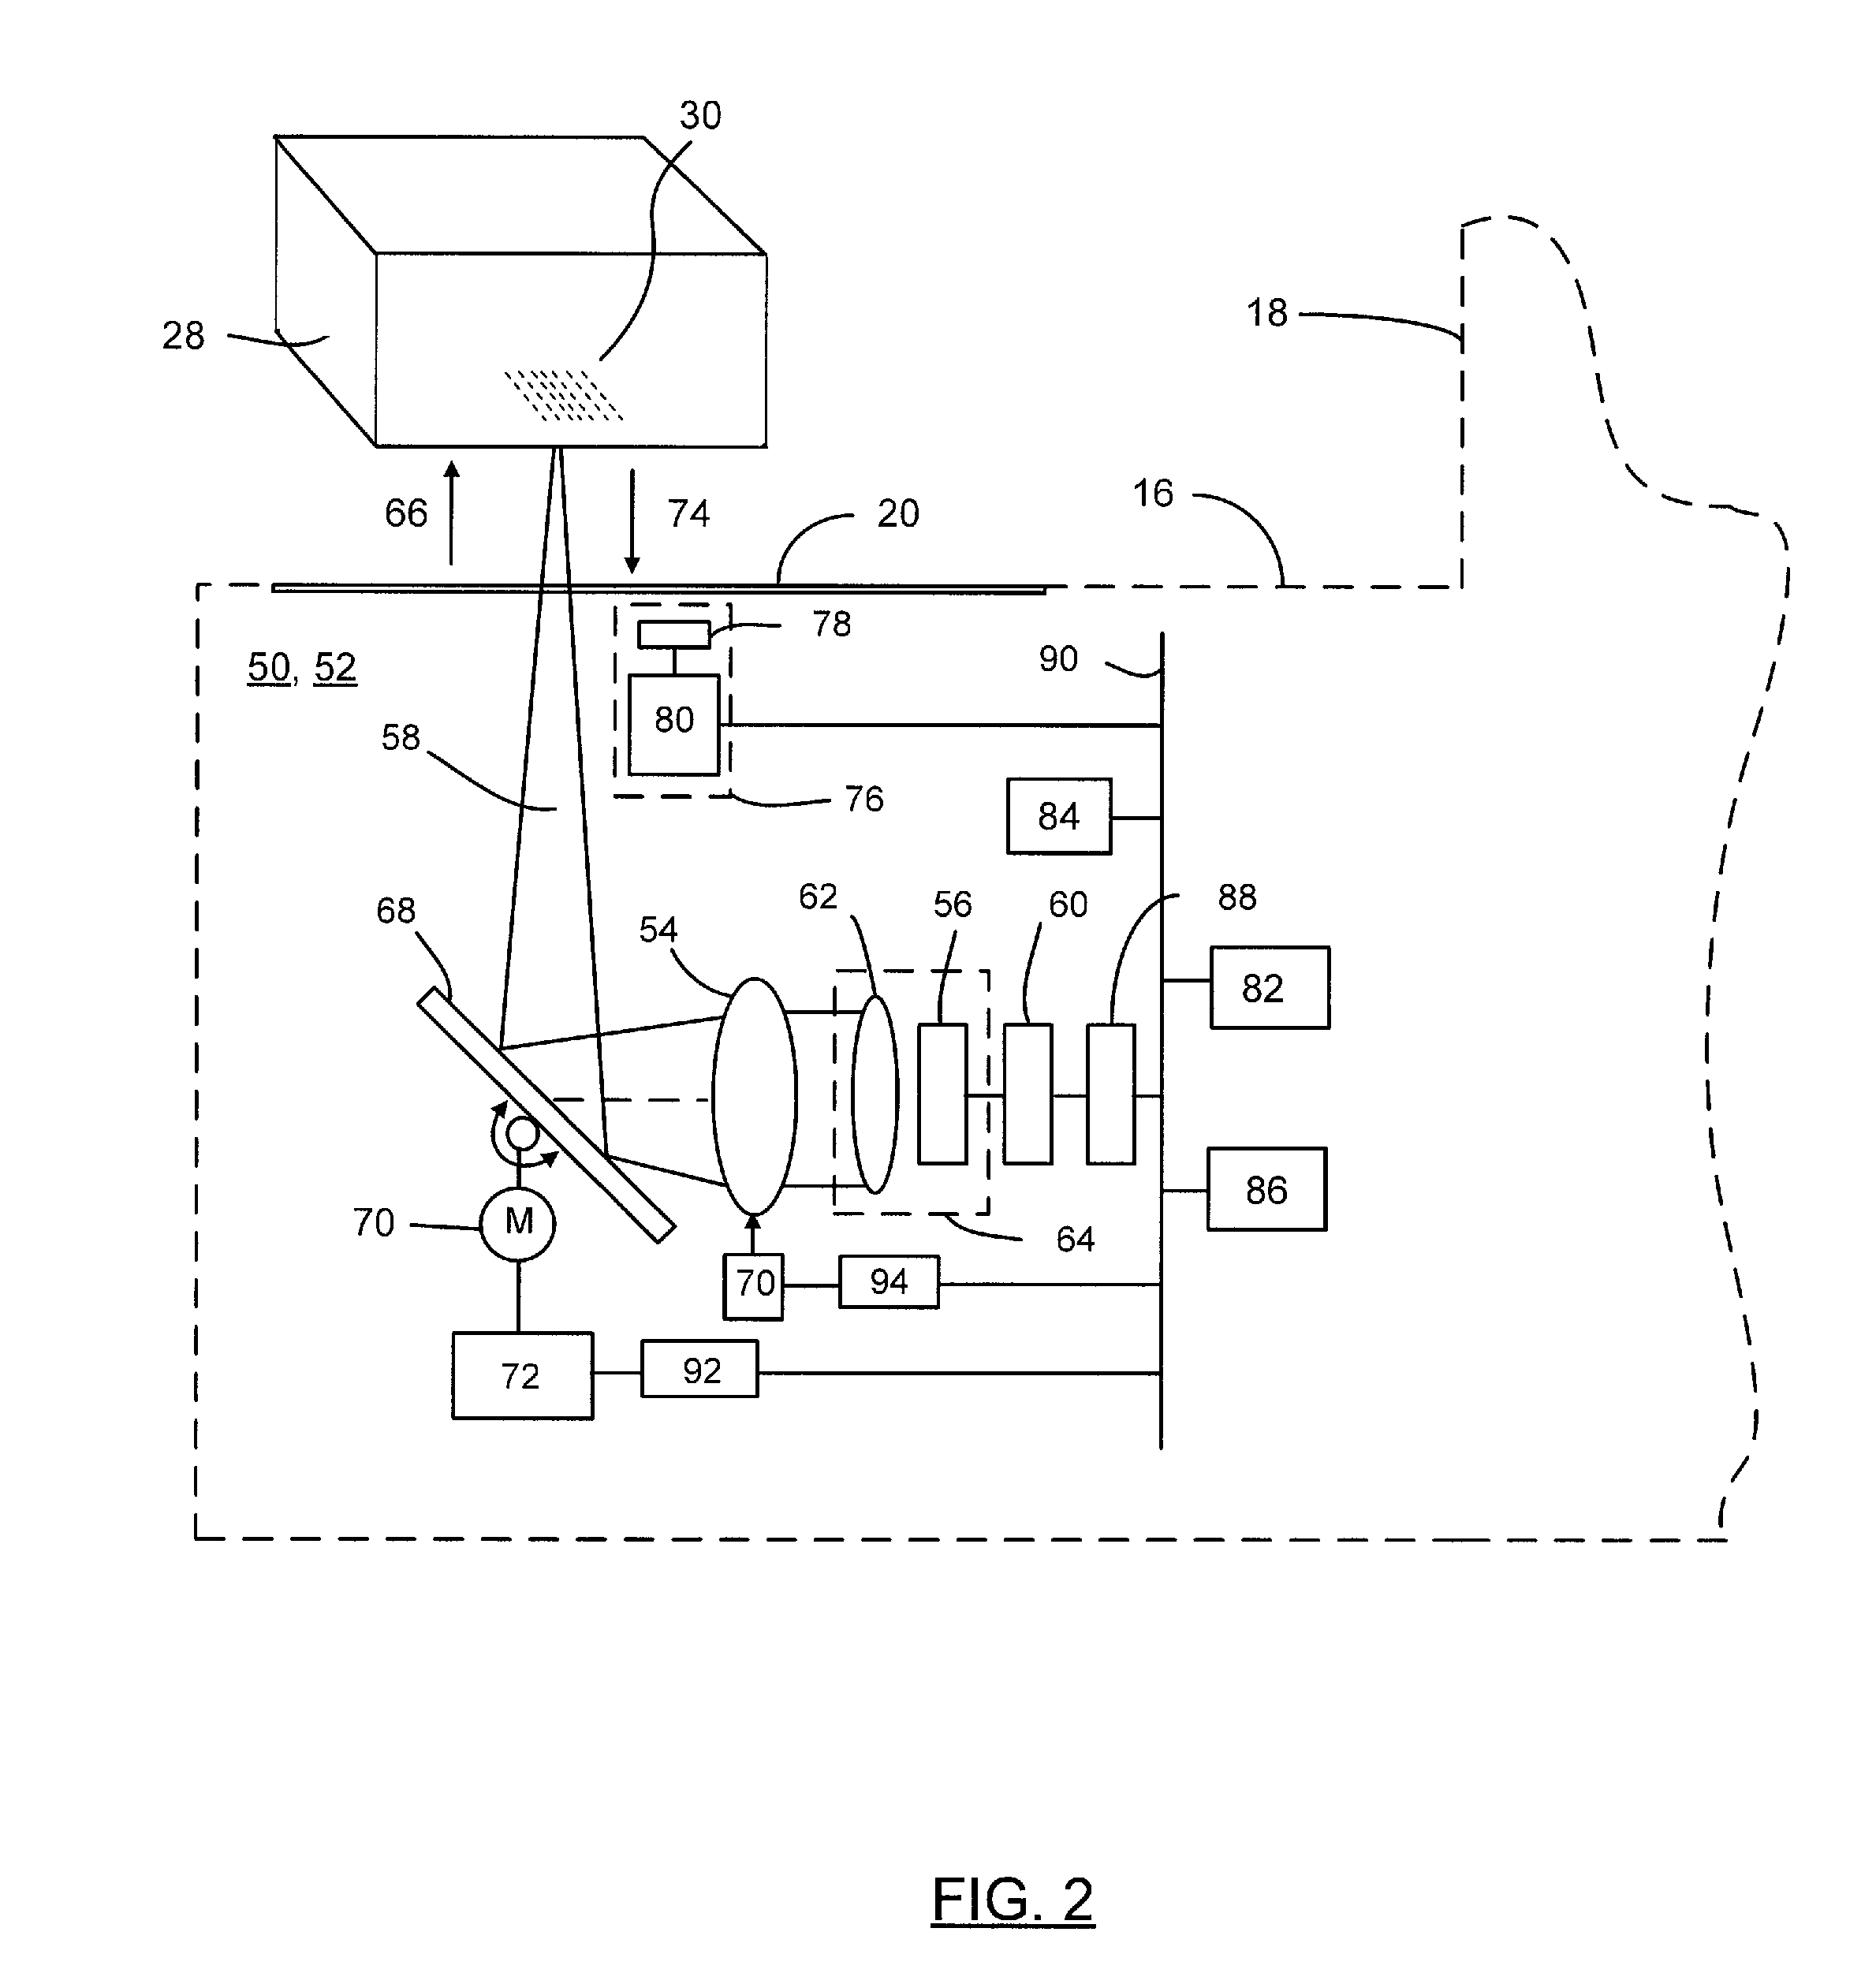 Method and apparatus for reading optical indicia using a plurality of data sources